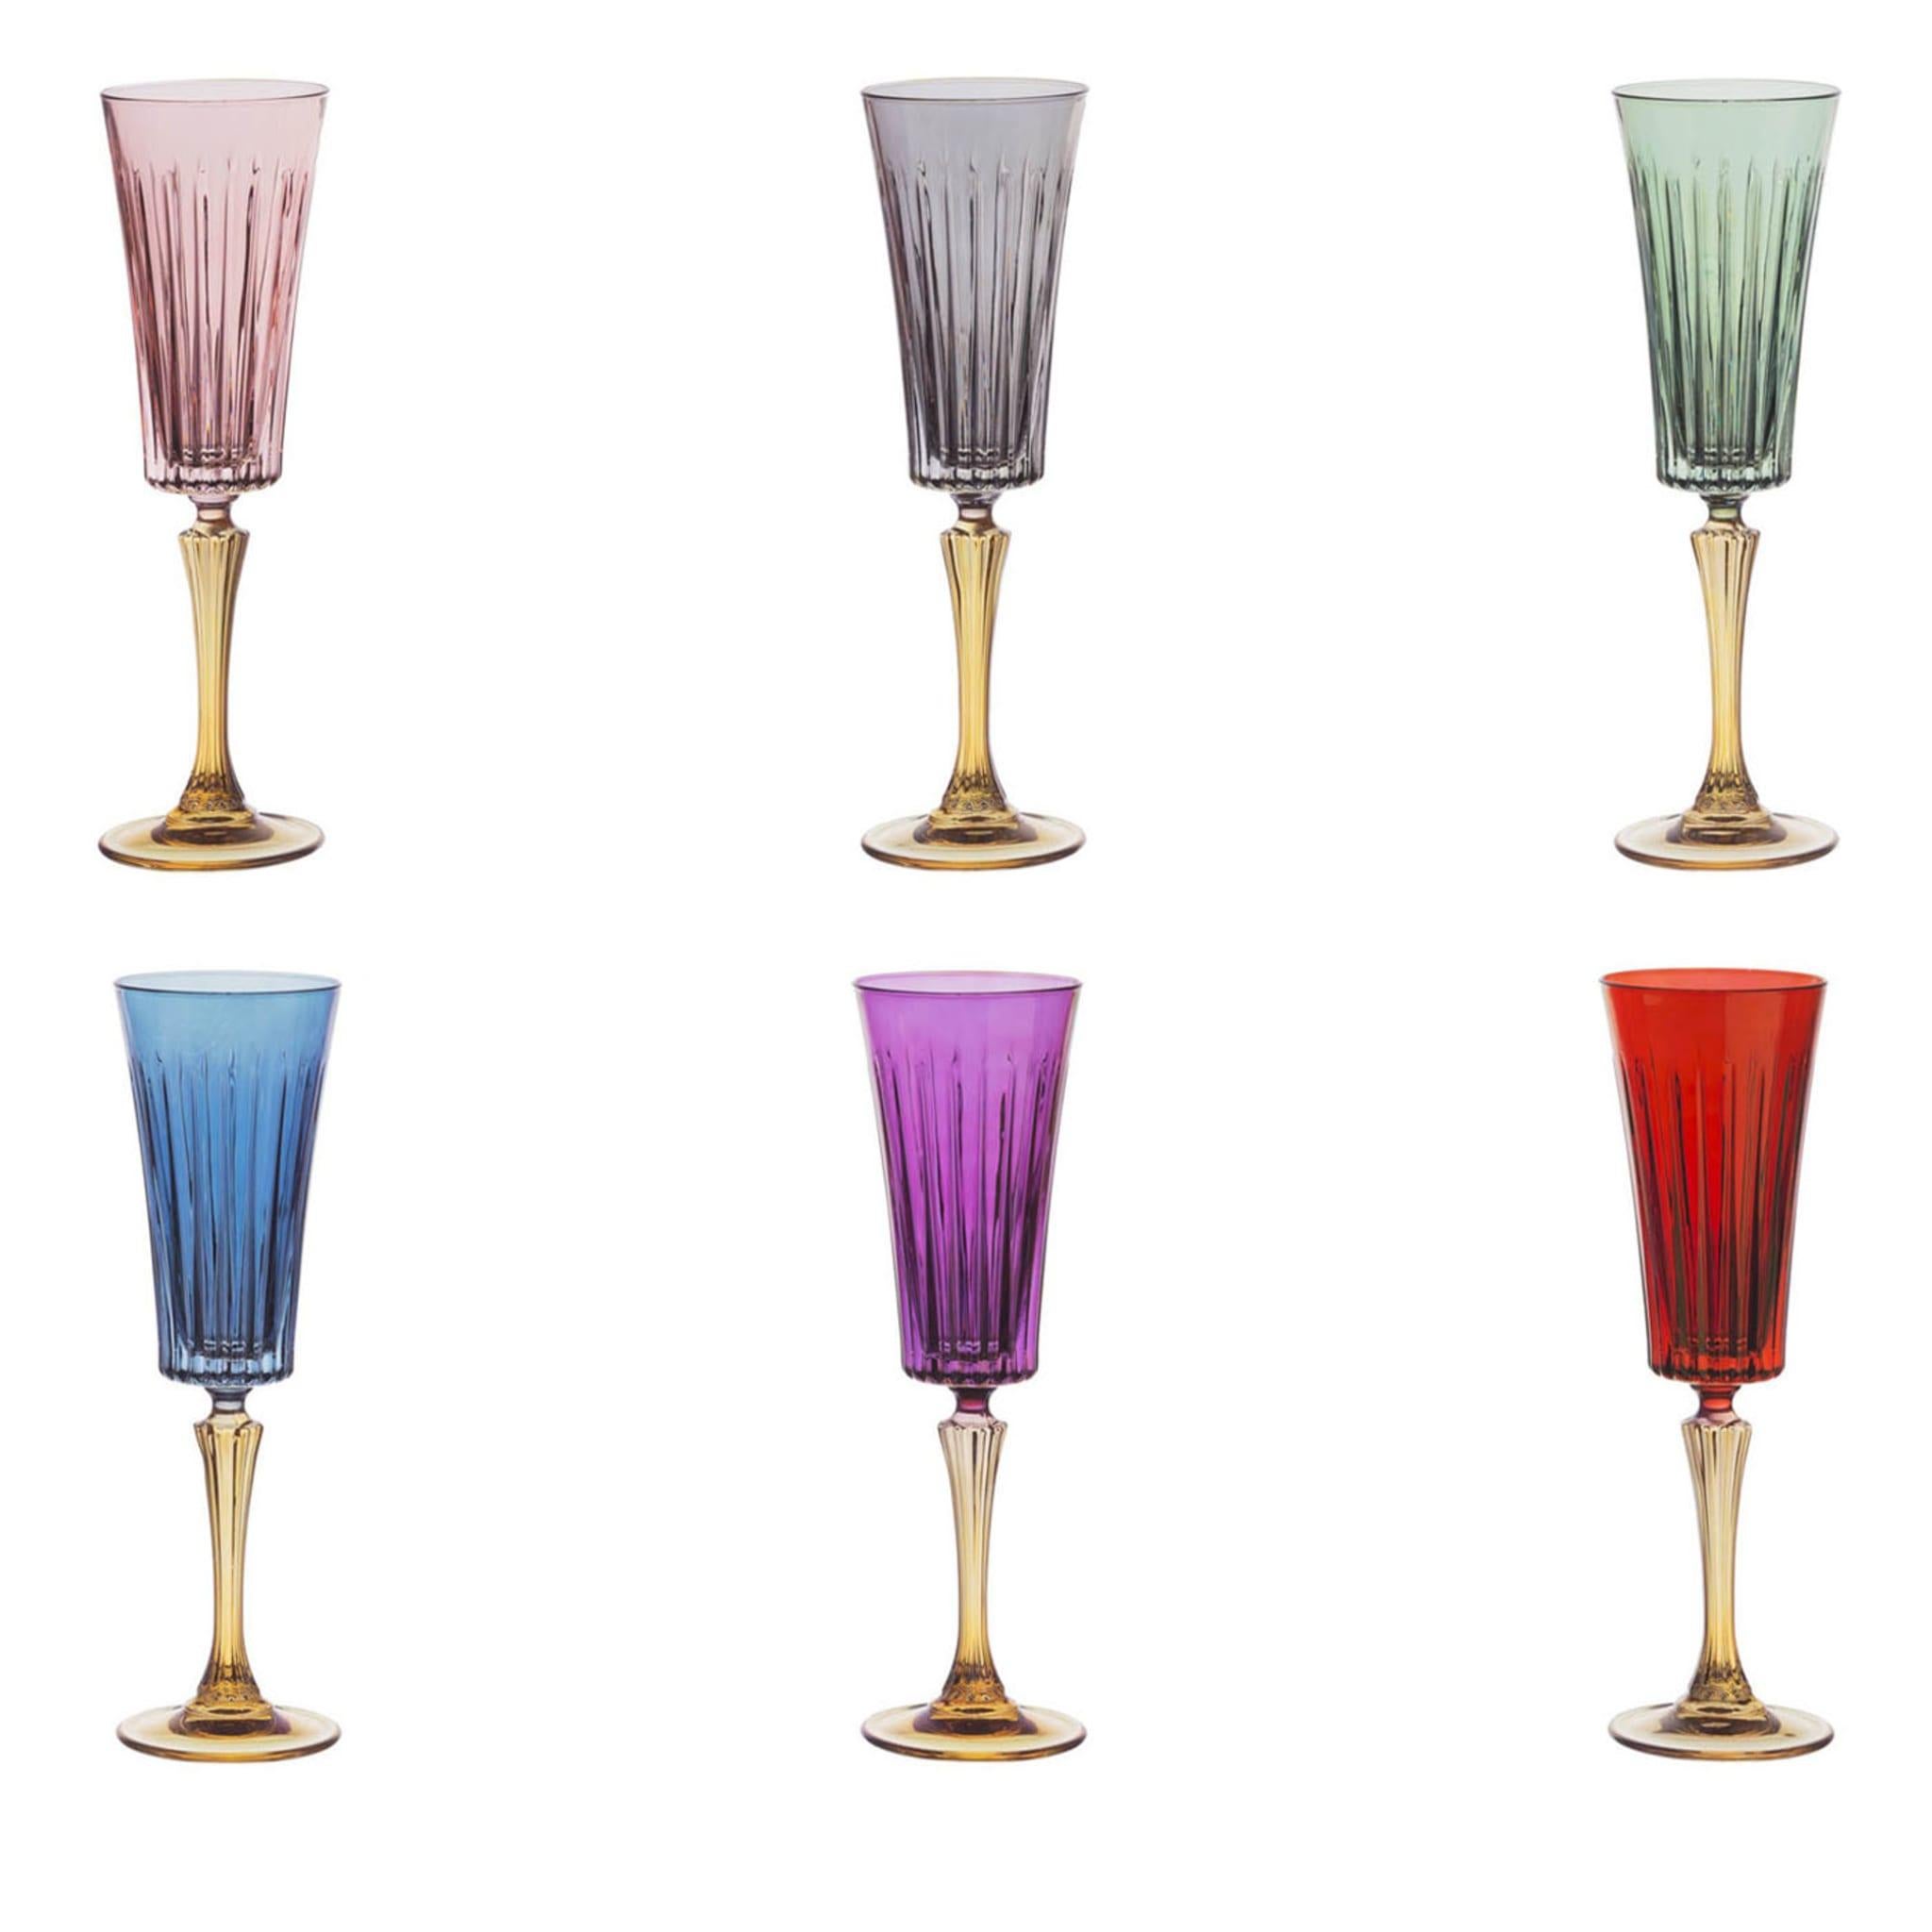 The champagne chalices in this set are truly unique pieces. Each one is crafted by hand and is featured in its own distinct shade.